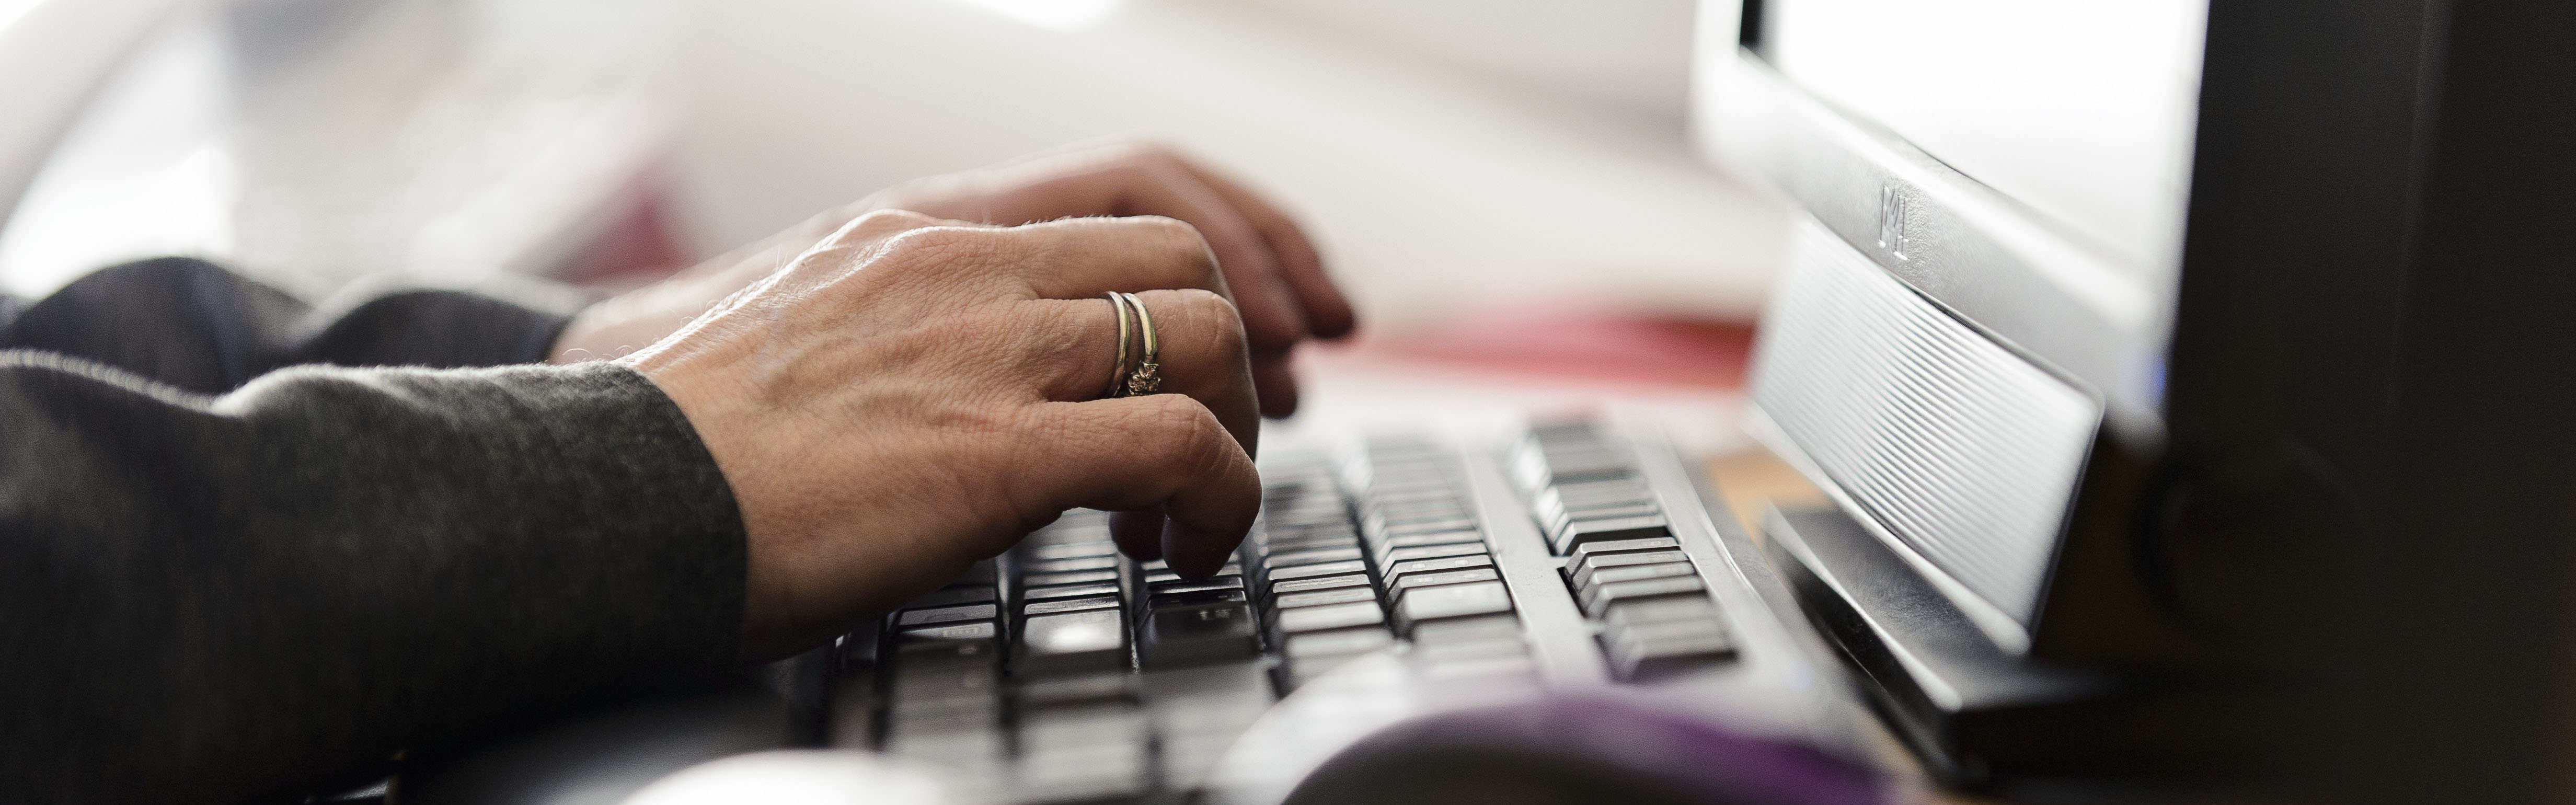 Photograph of hands typing on computer keyboard